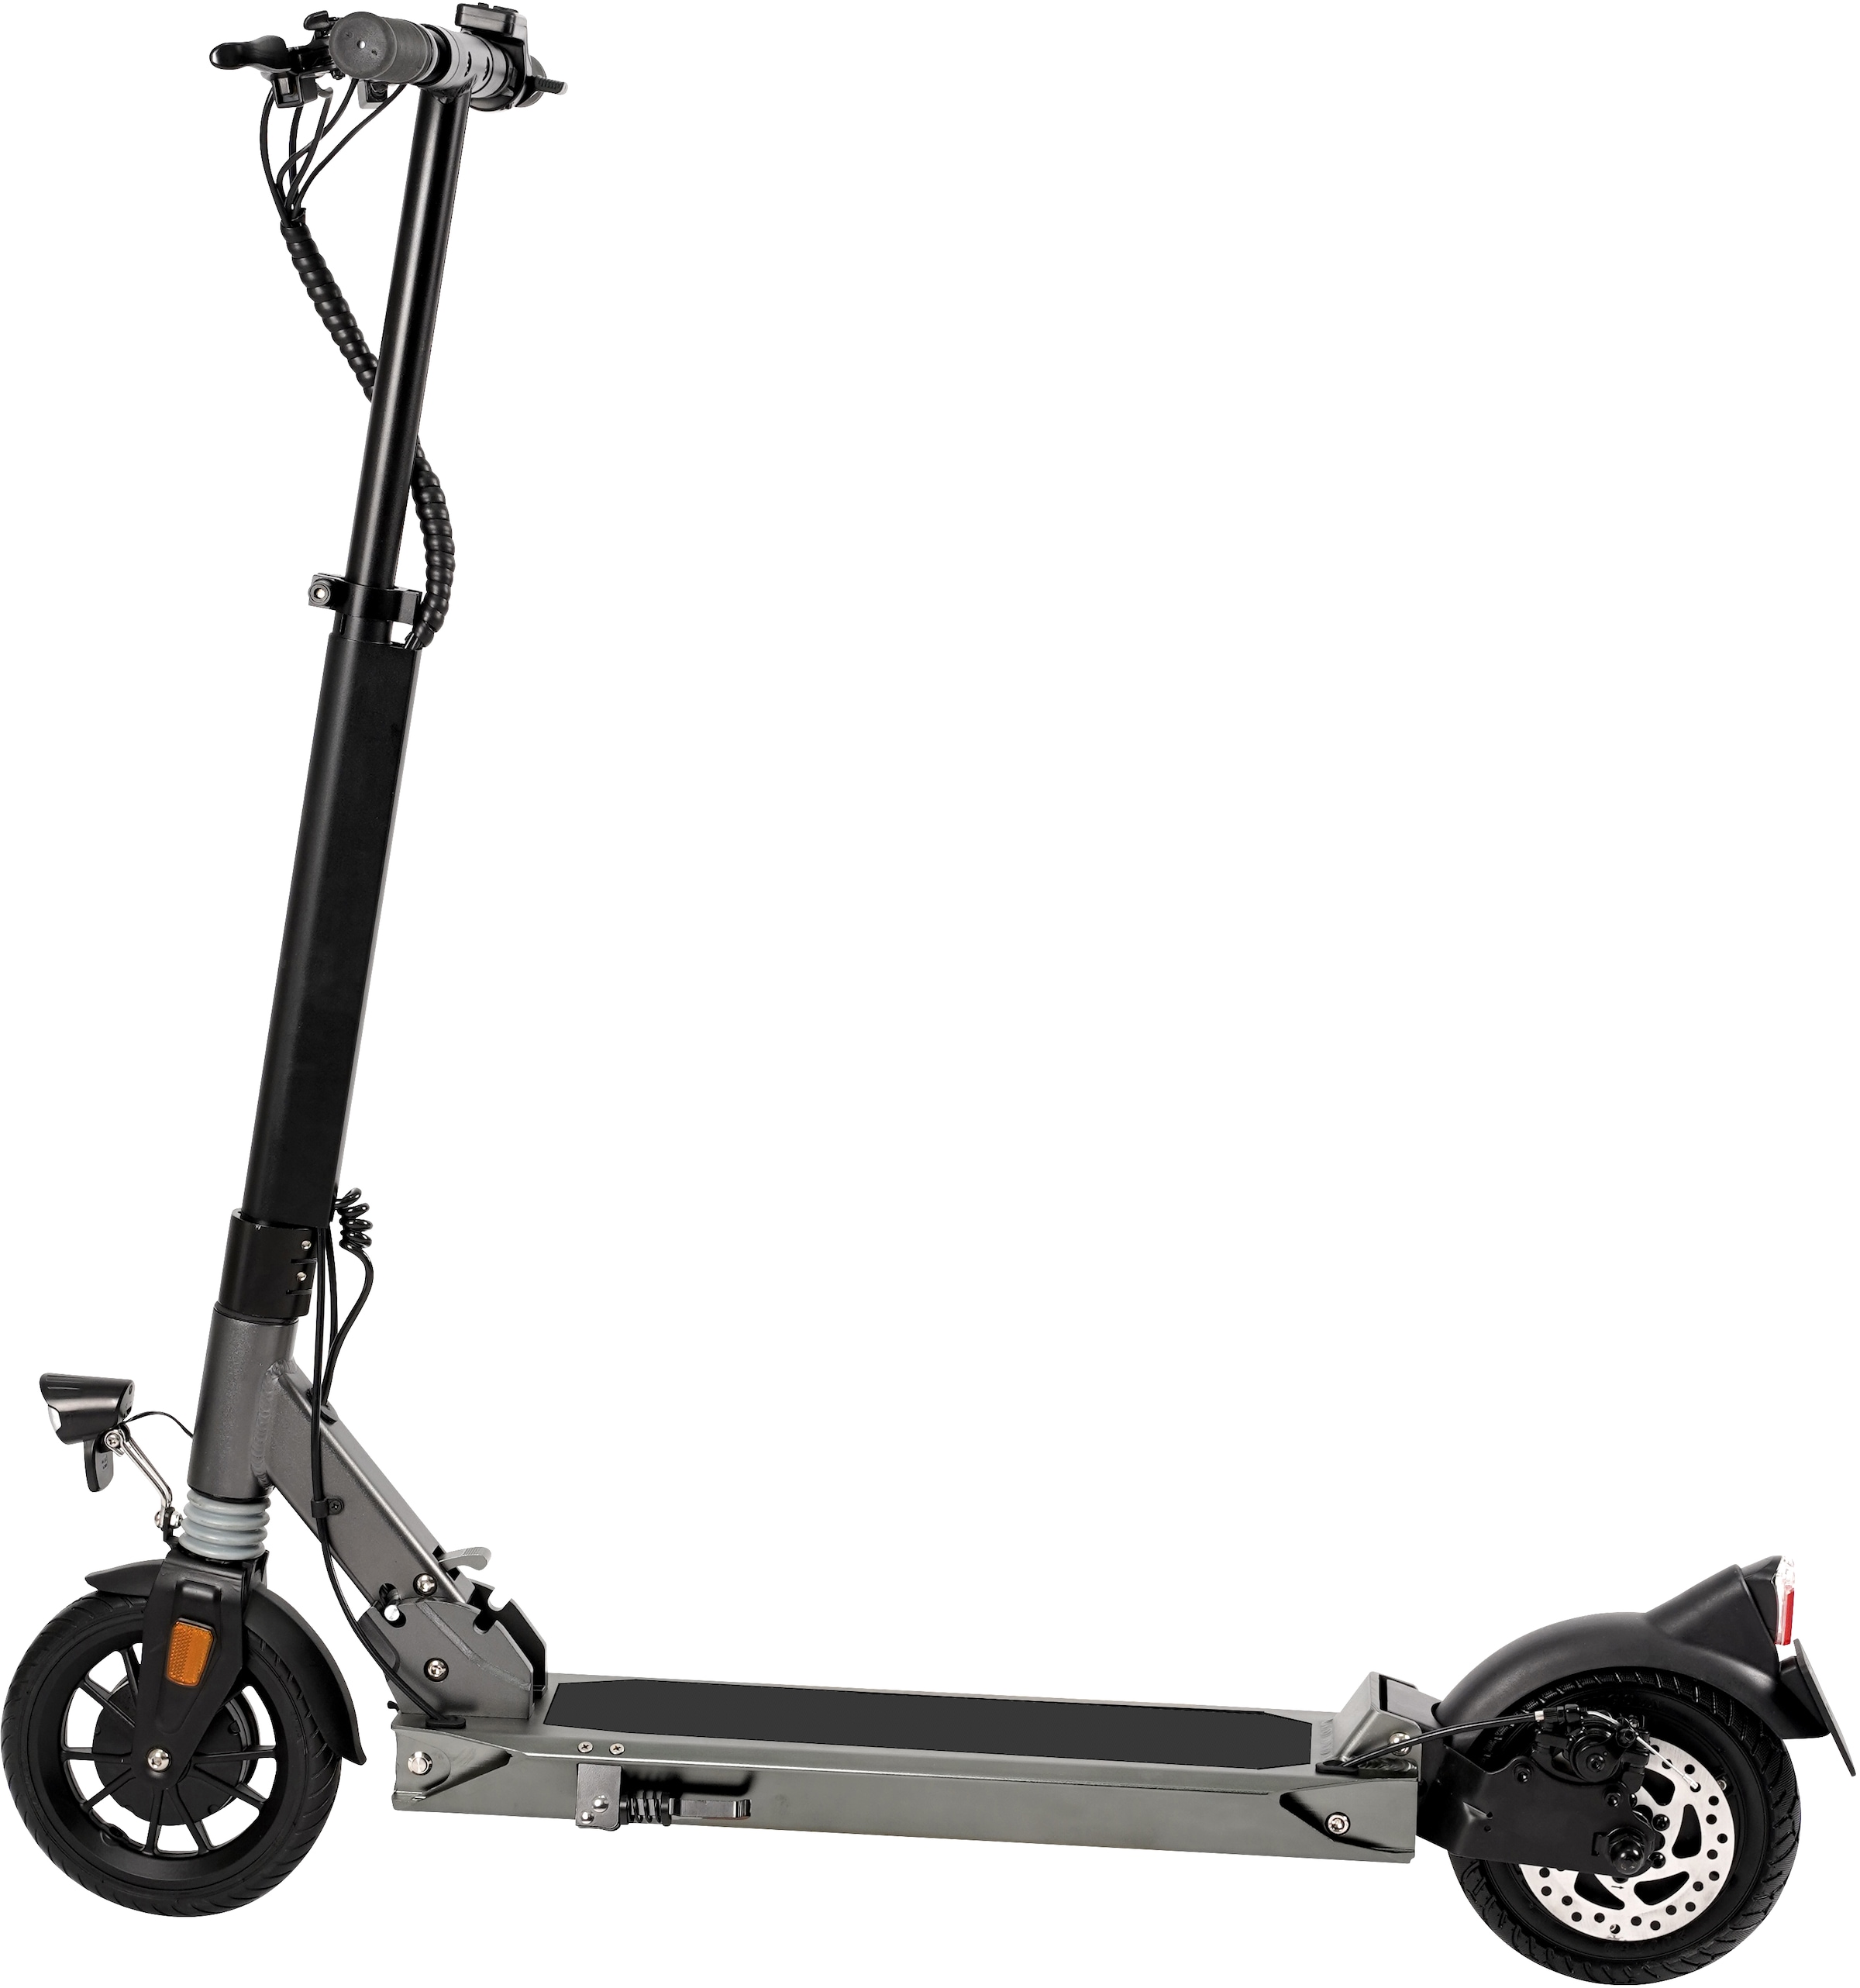 20 bei Deluxe »Speed Sports 25 ABE«, 7.8-350 L.A. km km/h, E-Scooter